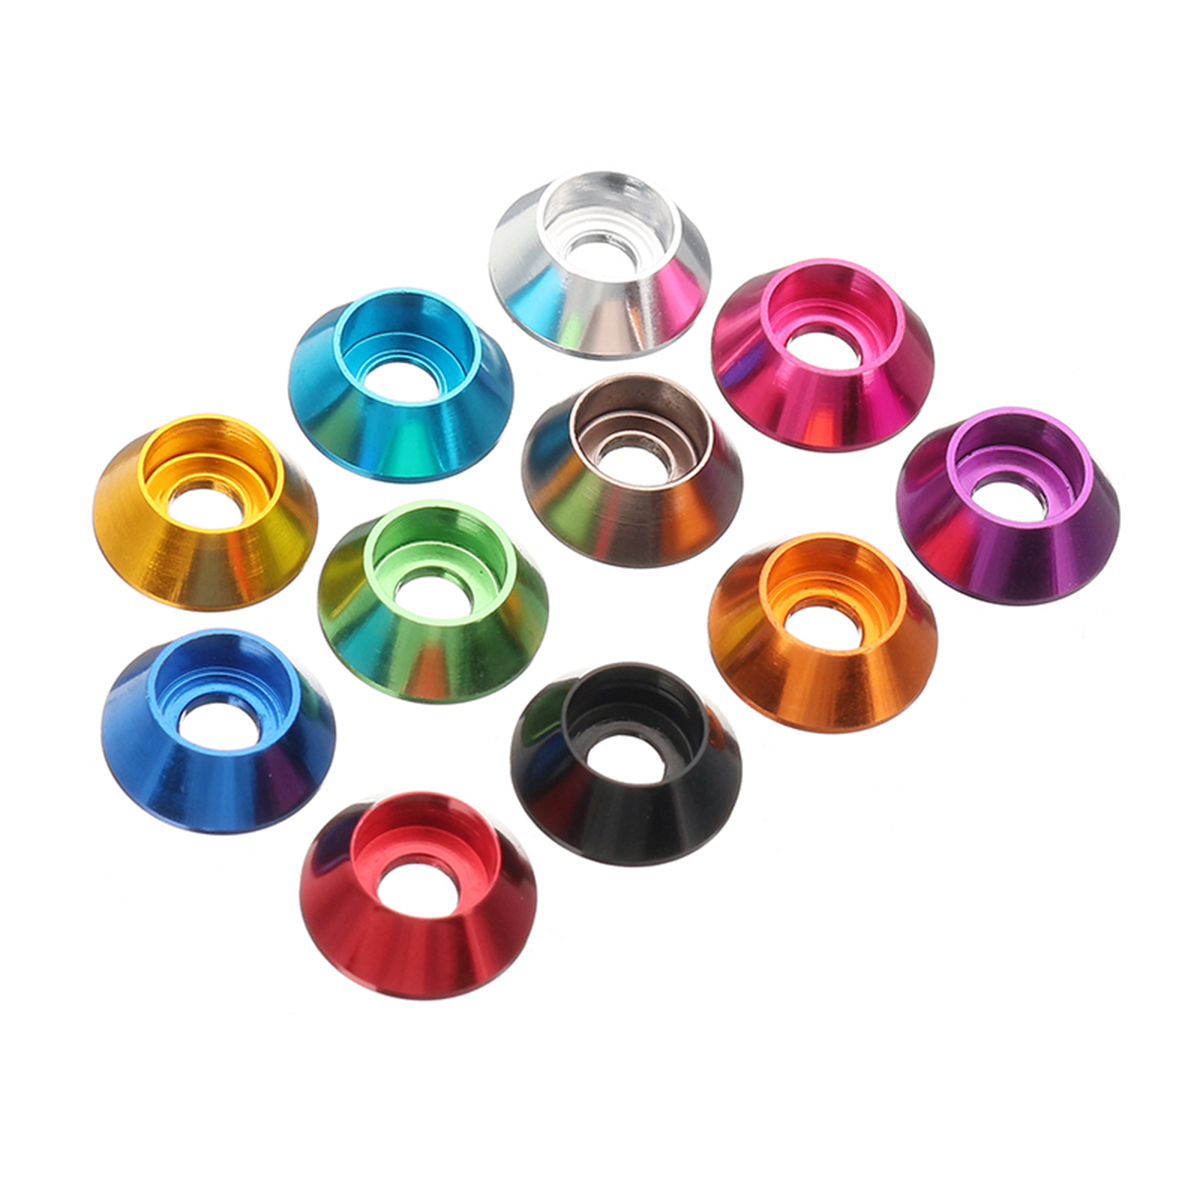 Sulevetrade-M5AN2-10Pcs-M5-Cup-Head-Hex-Screw-Gasket-Washer-Nuts-Aluminum-Alloy-Multicolor-1535744-2